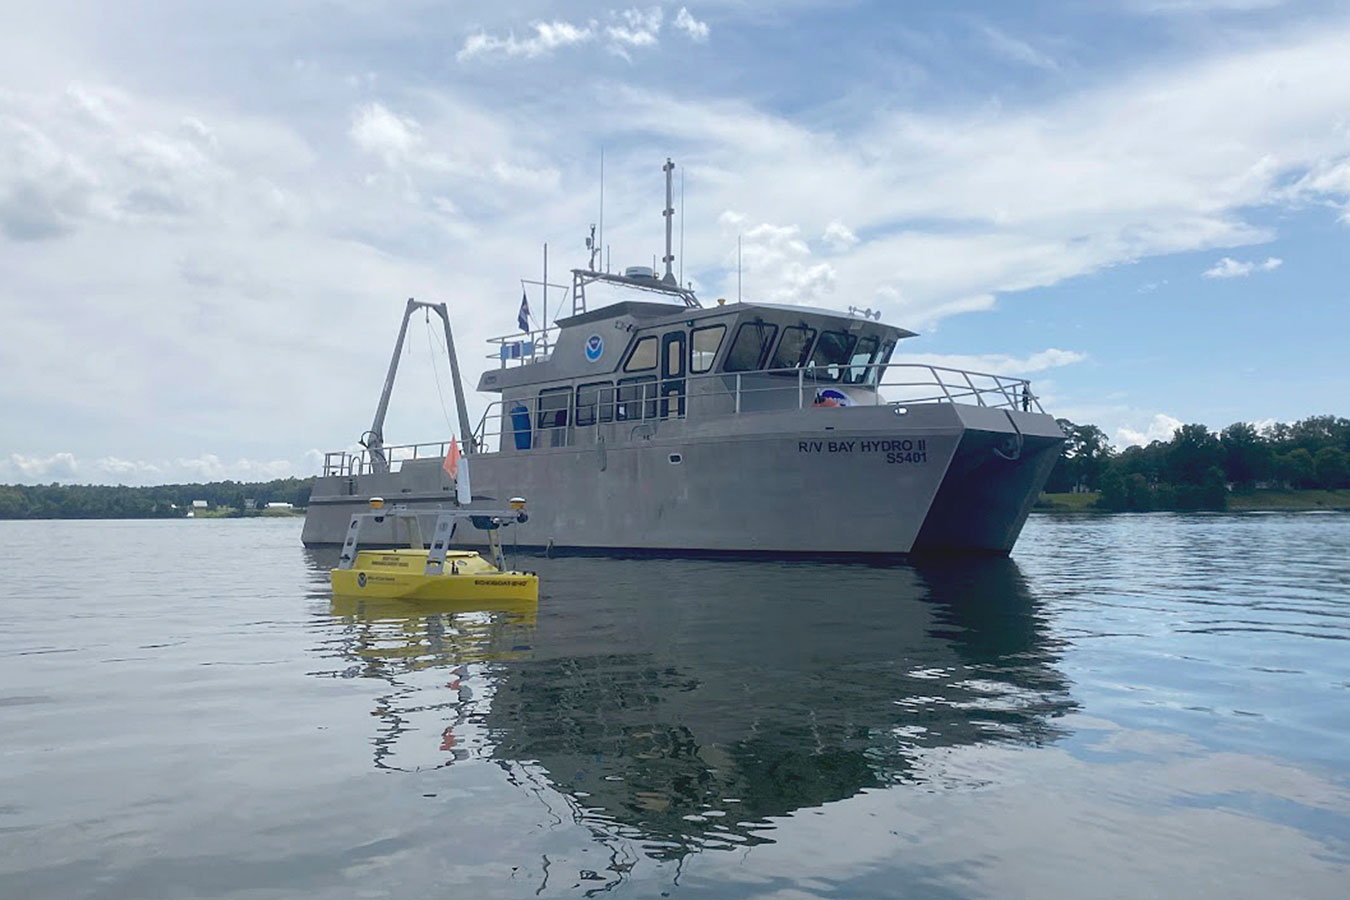 NOAA's Bay Hydro II on the water with the Echoboat 240, an uncrewed surface vehicle, in the foreground. Credit: NOAA